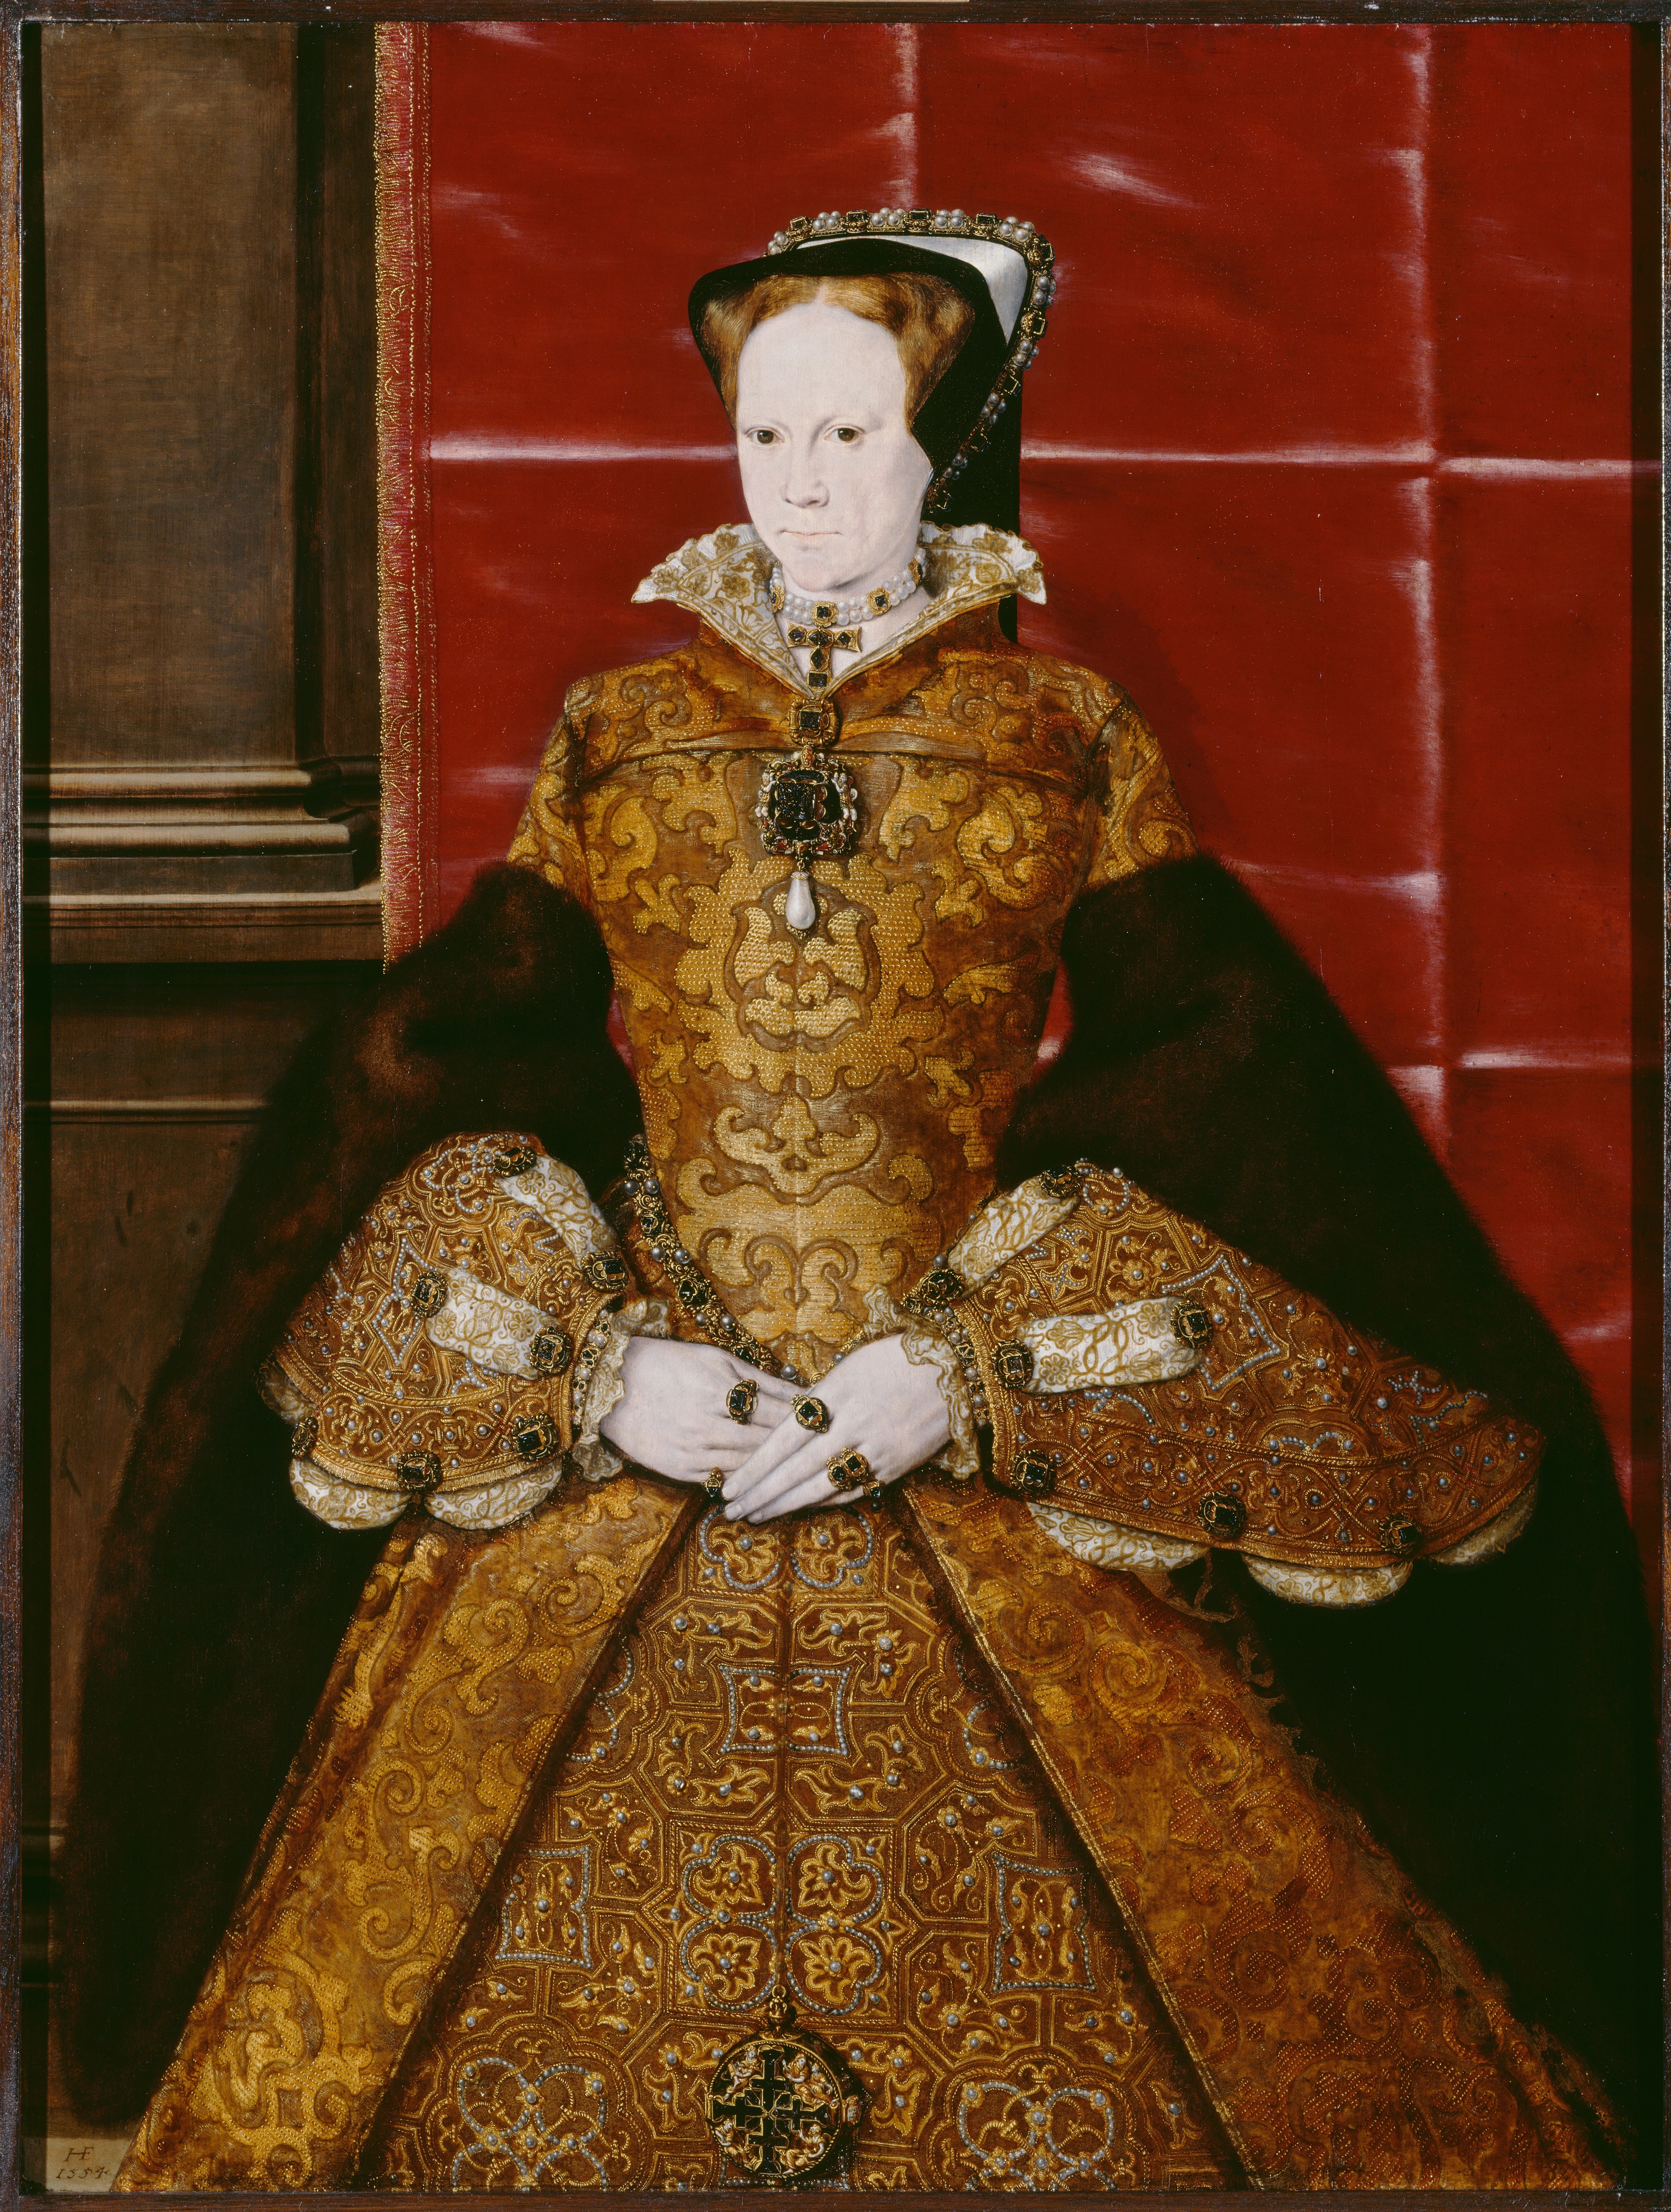 Hans Eworth (Flemish, circa 1525–after 1578) ‘Mary I,’ 1554. Oil on wood, 41 by 30 3/4in. (104 by 78cm). Society of Antiquaries of London. Image © The Society of Antiquaries of London 